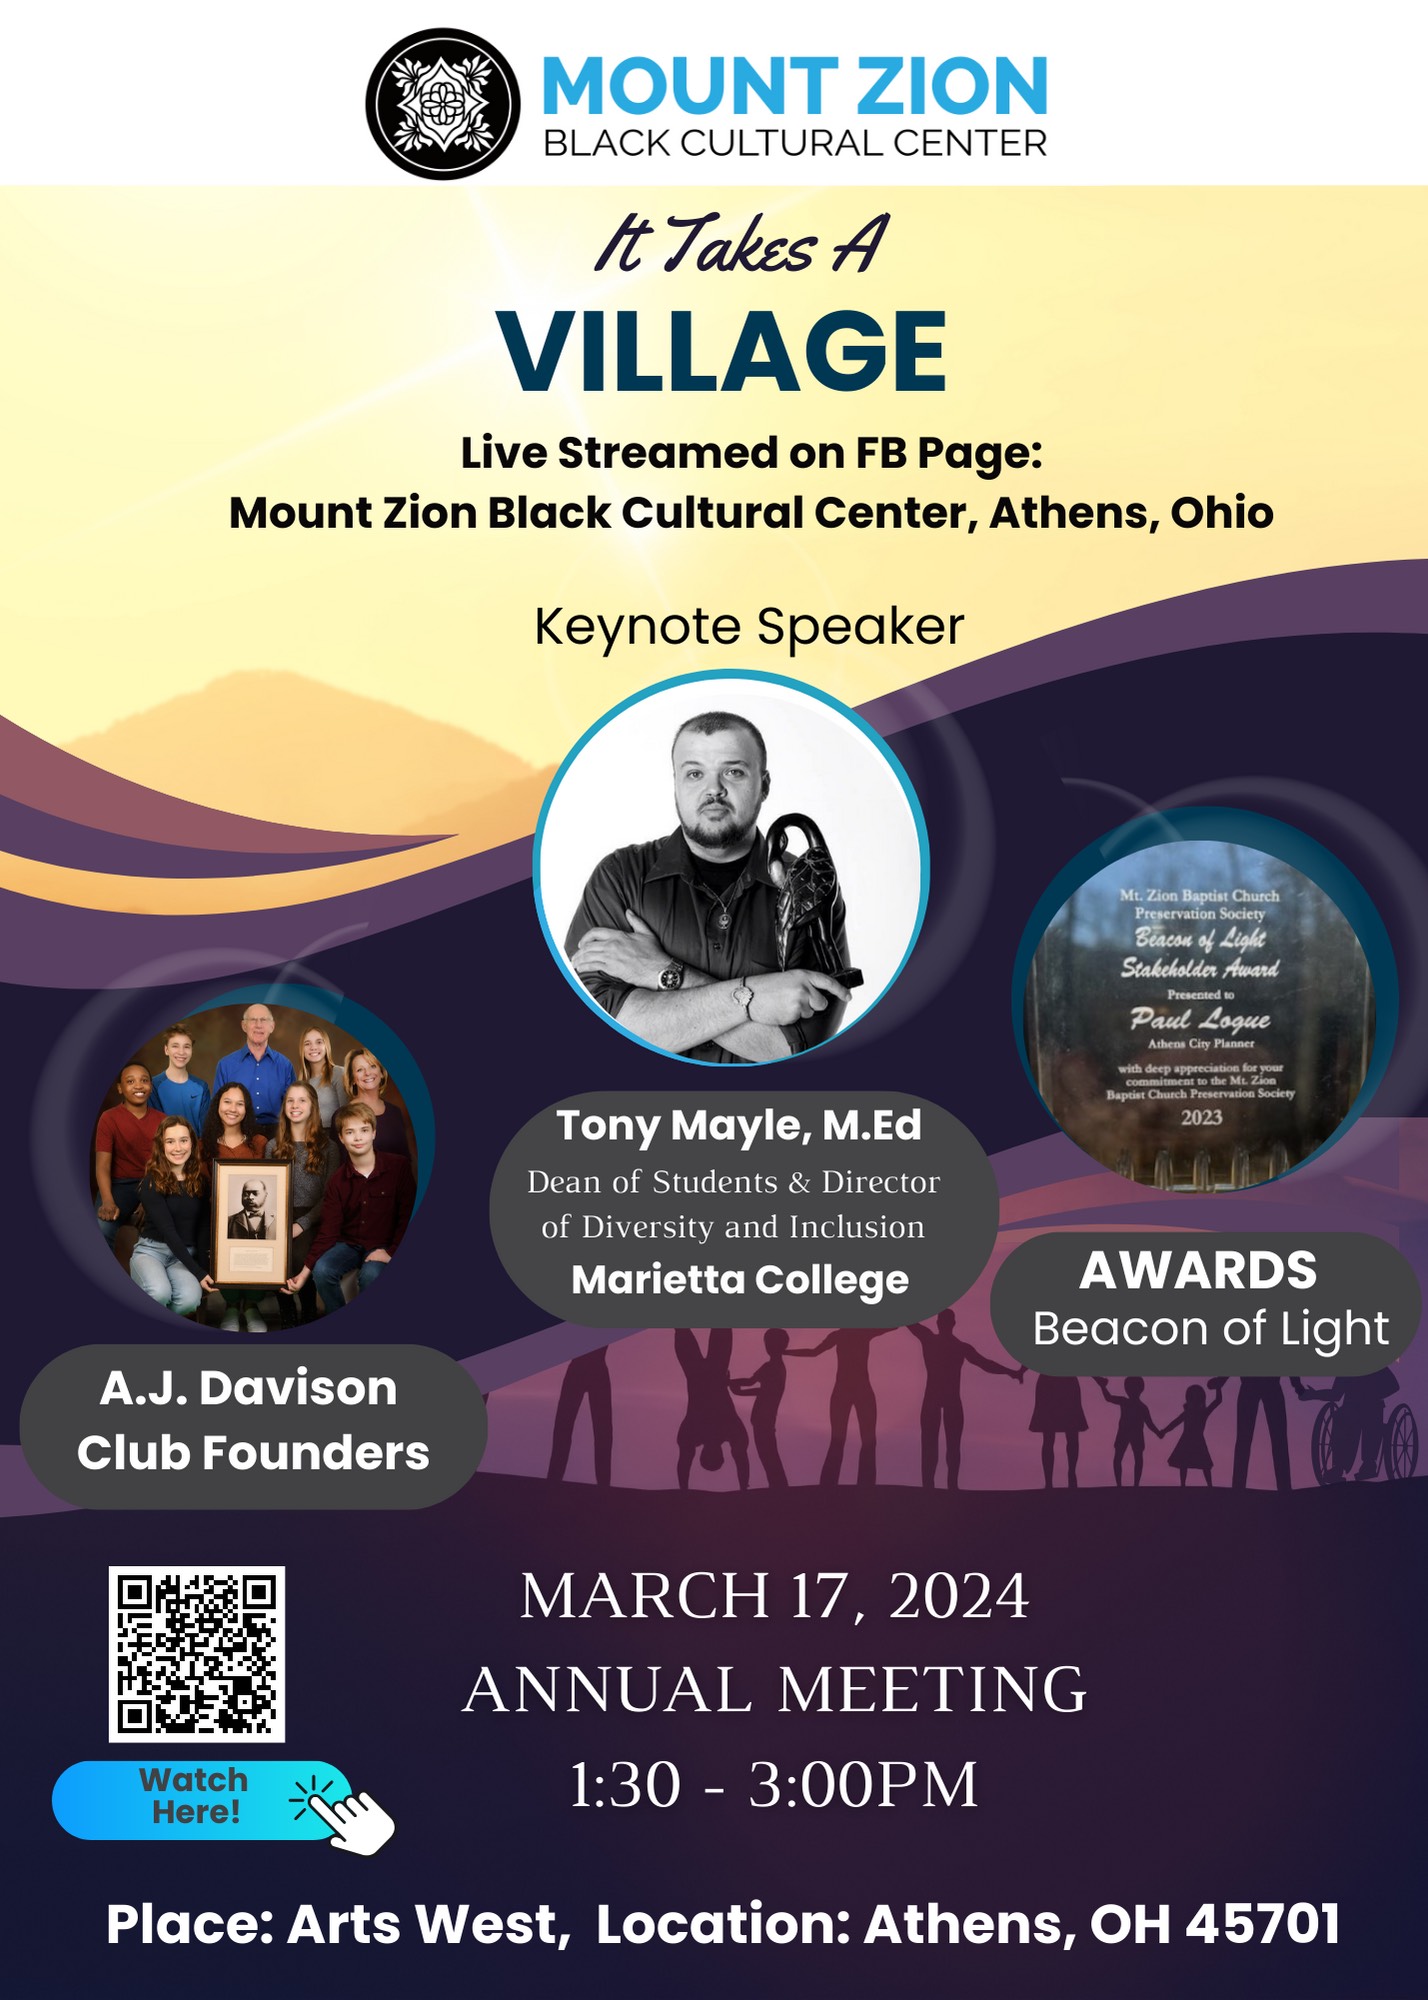 An image of the flyer for the Mount Zion Baptist Church's "It Takes a Village" meeting.